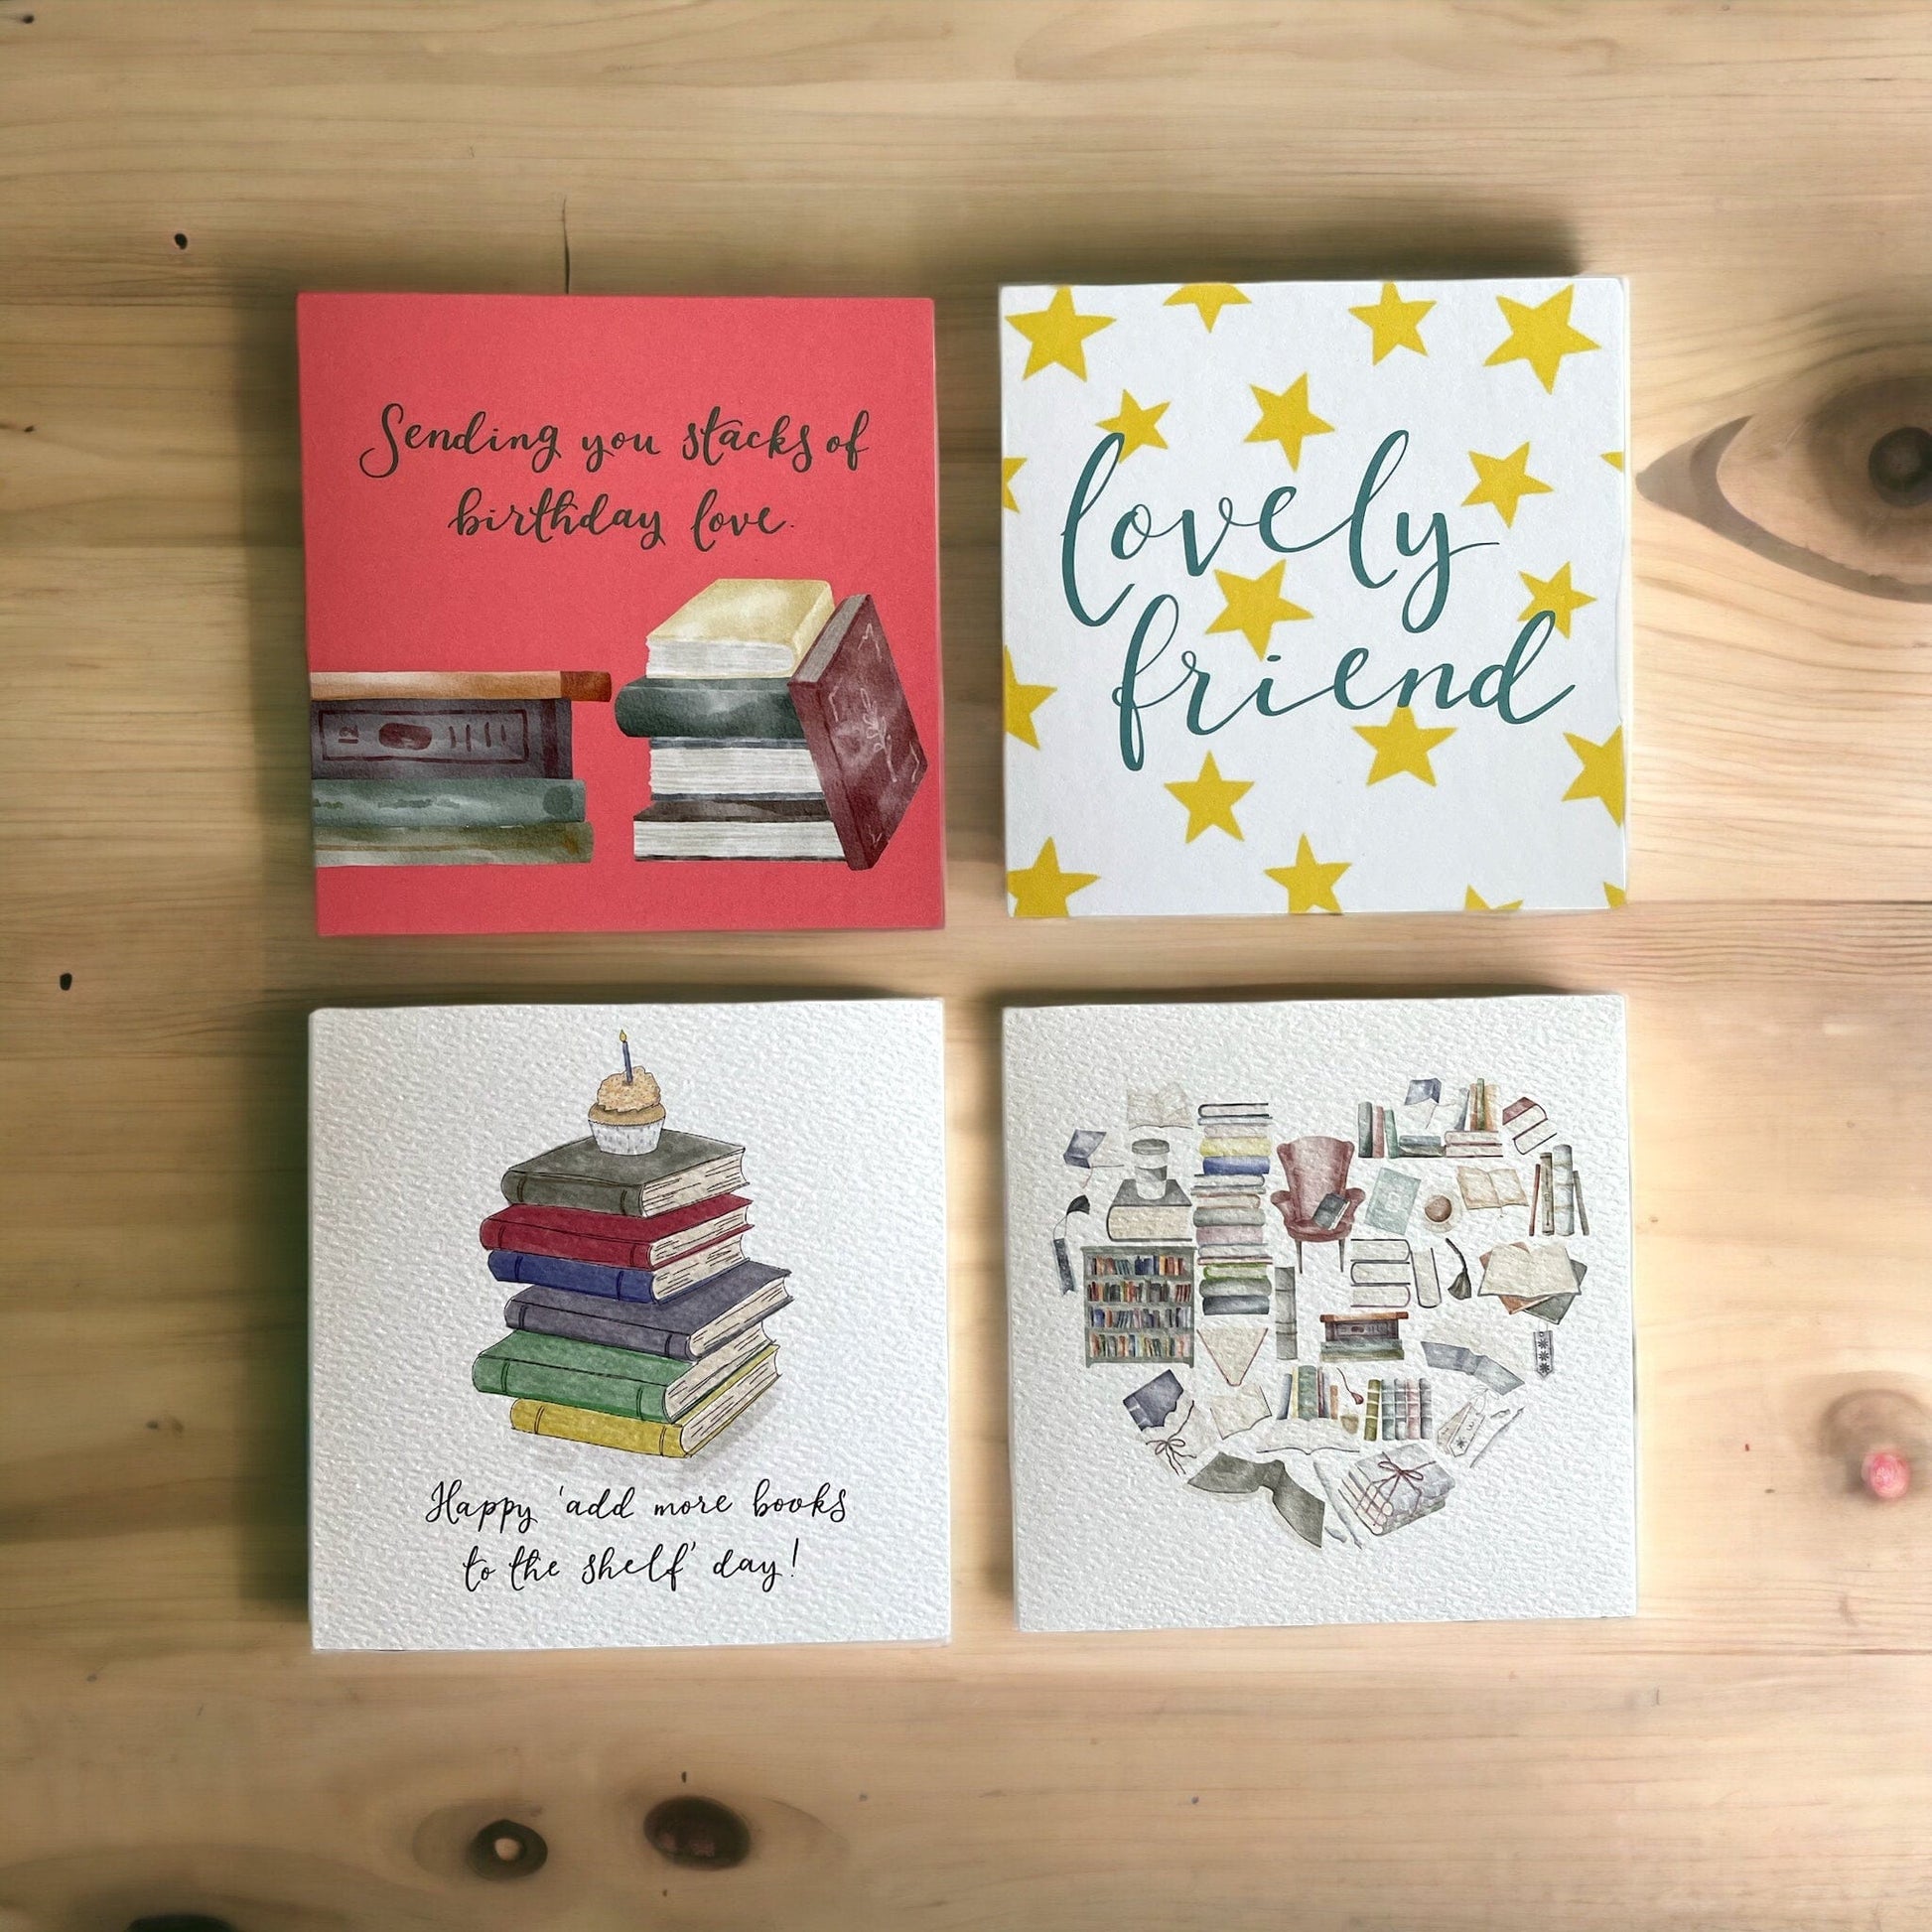 And Hope Designs Book lover’s letterbox gift